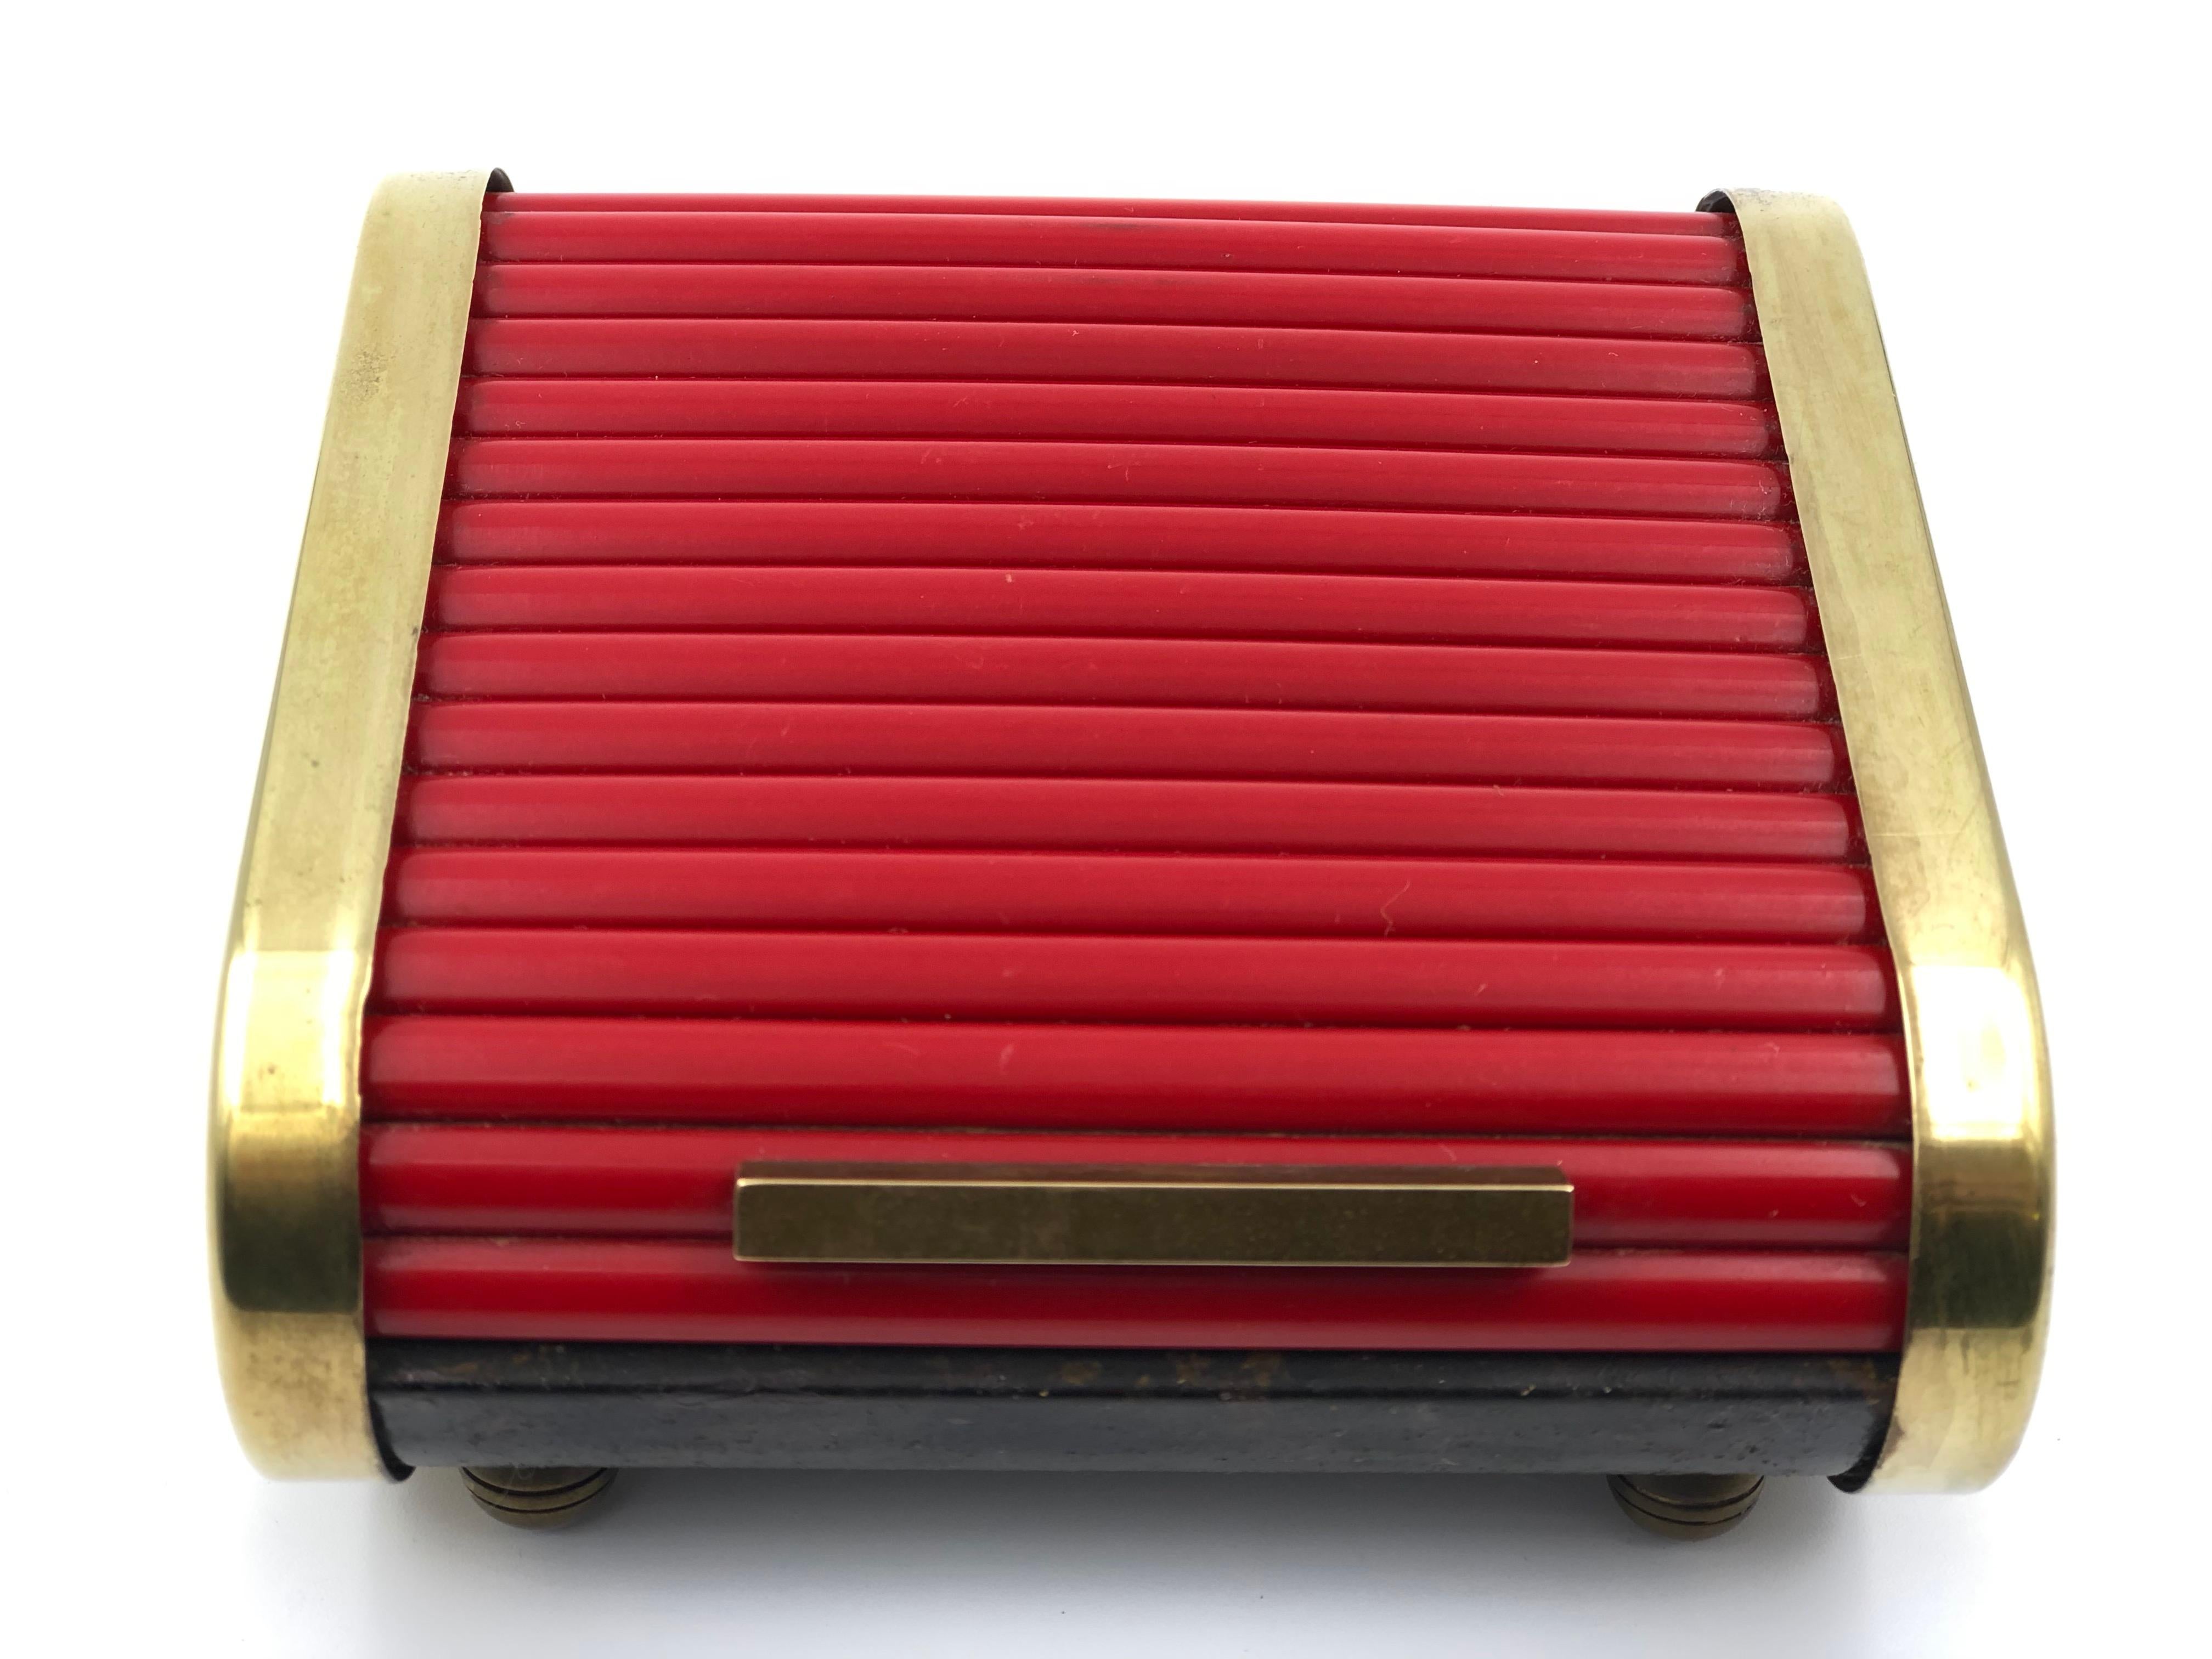 20th Century Art Deco Tambour Top Desk Caddy of Red Bakelite and Brass by Park Sherman